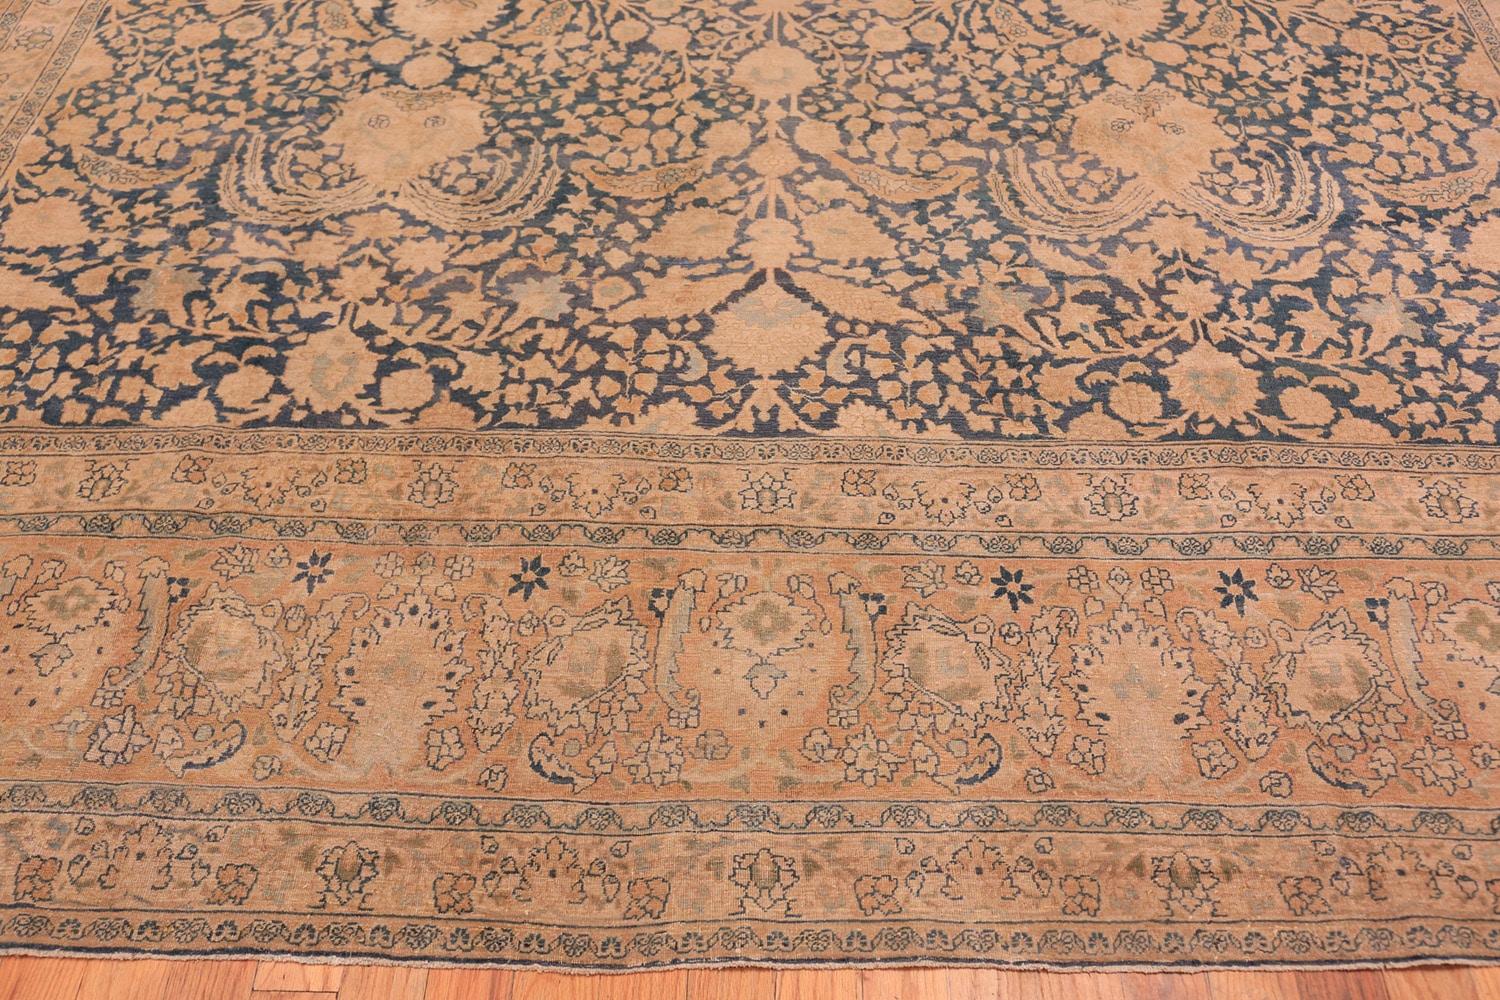 Large antique size Khorassan Persian rug, country of origin, Persia, date circa 1920. Size: 11 ft 10 in x 17 ft (3.61 m x 5.18 m)

This splendid antique Oriental carpet from Khorassan in Persia was woven in the 1920’s at one of the major carpet